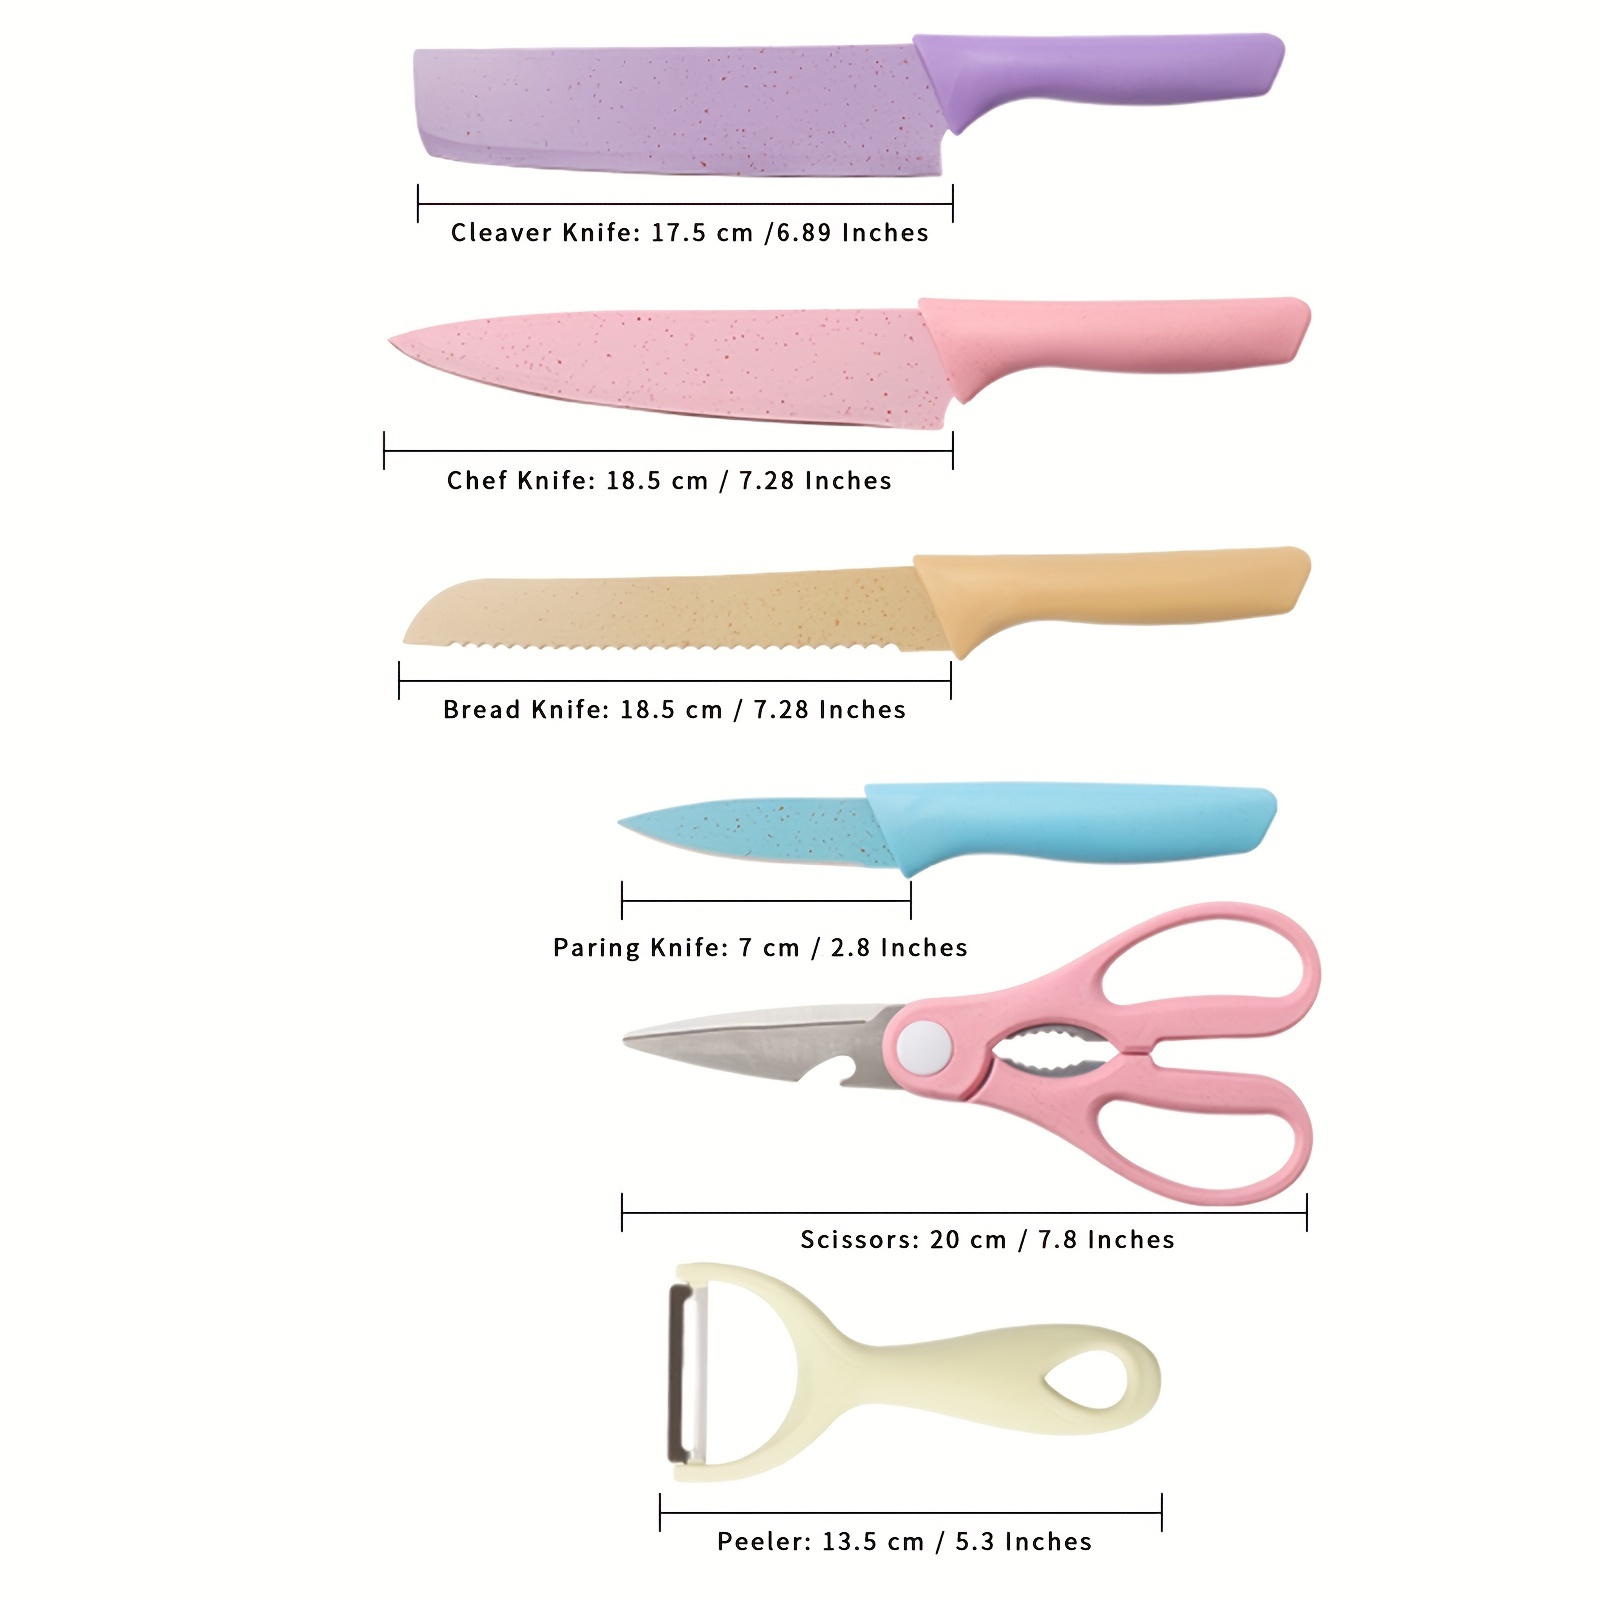 6 Pcs Colorful Kitchen Knife Set,Colored Kitchen Knives Set with Non-Stick Coating for Cooking,Travel, Pink